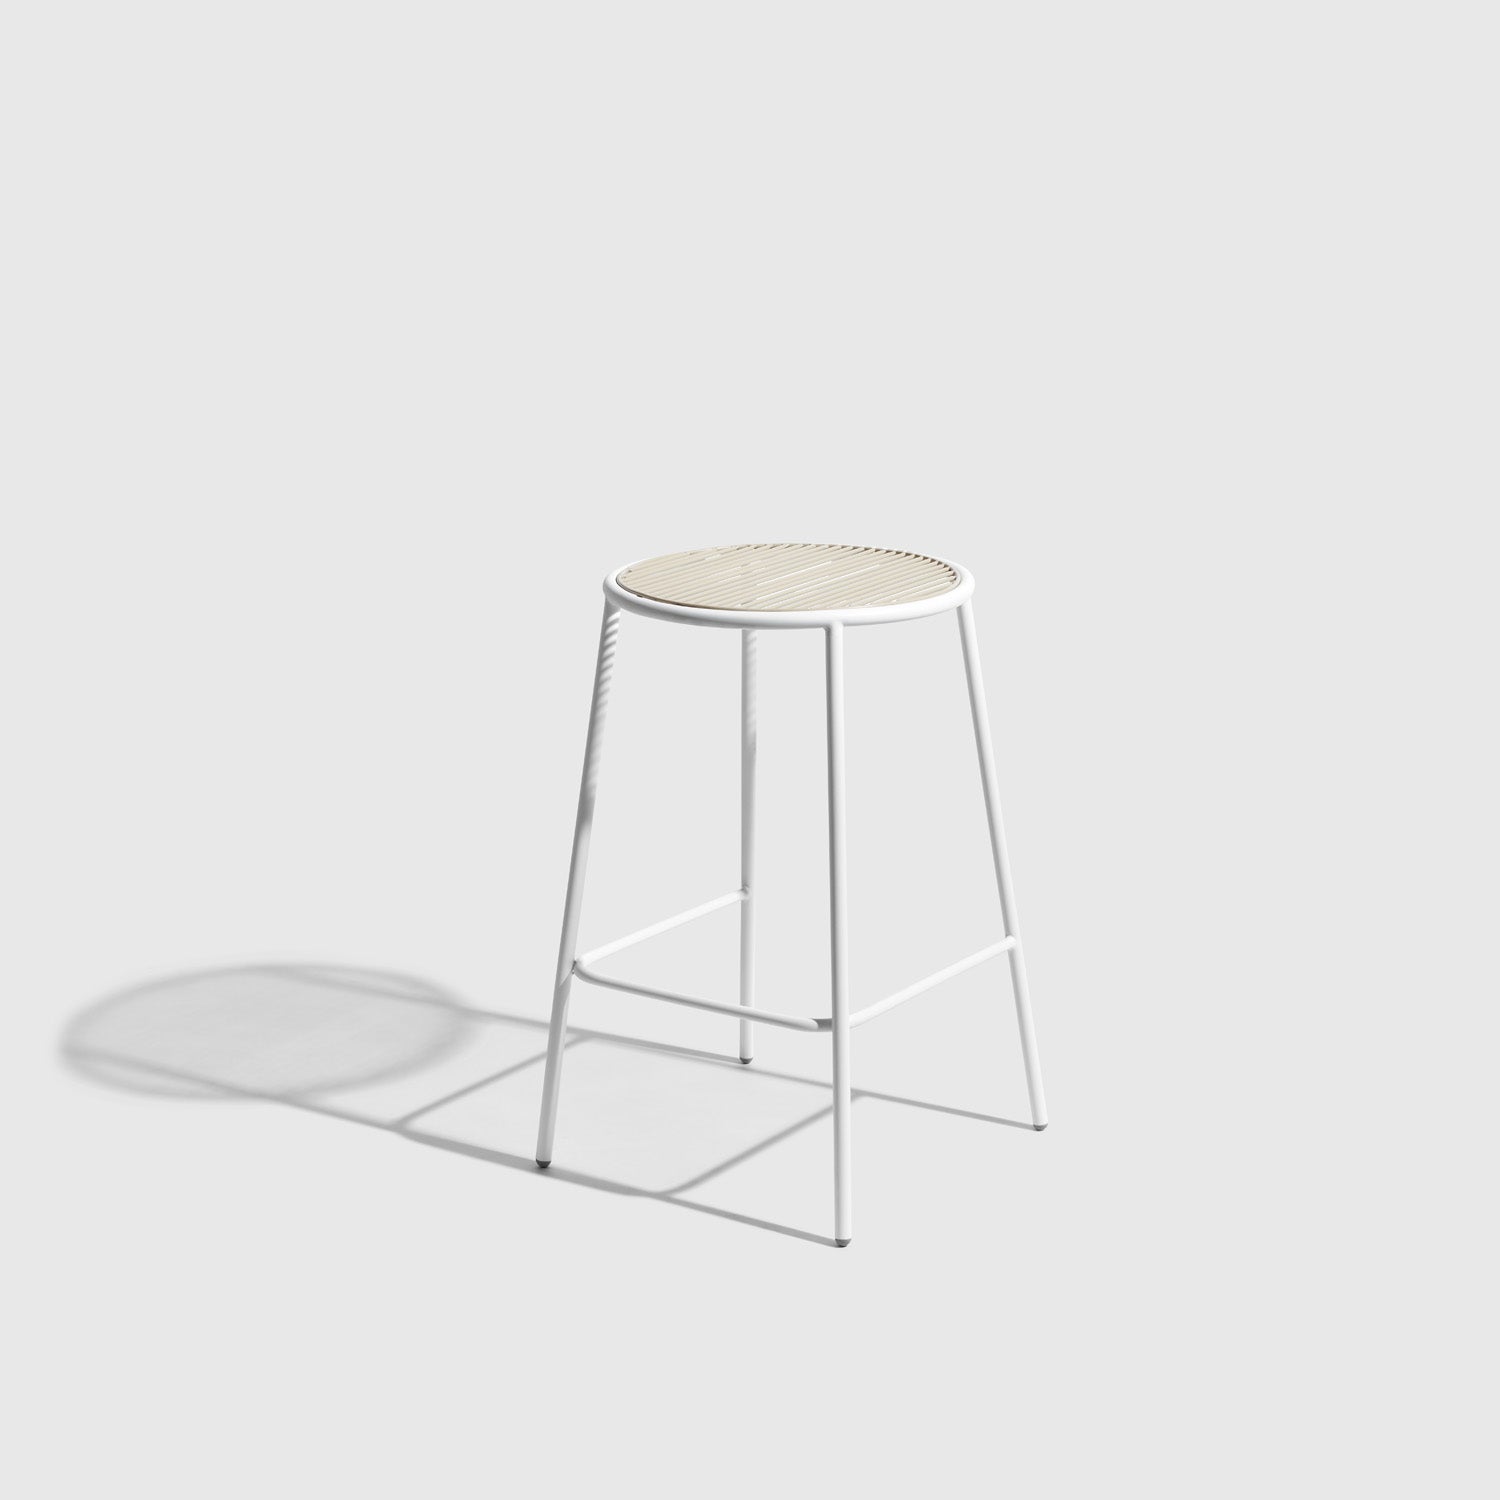 Piper Low and Bar Stools | Indoor/Outdoor Seating | DesignByThem | GibsonKarlo